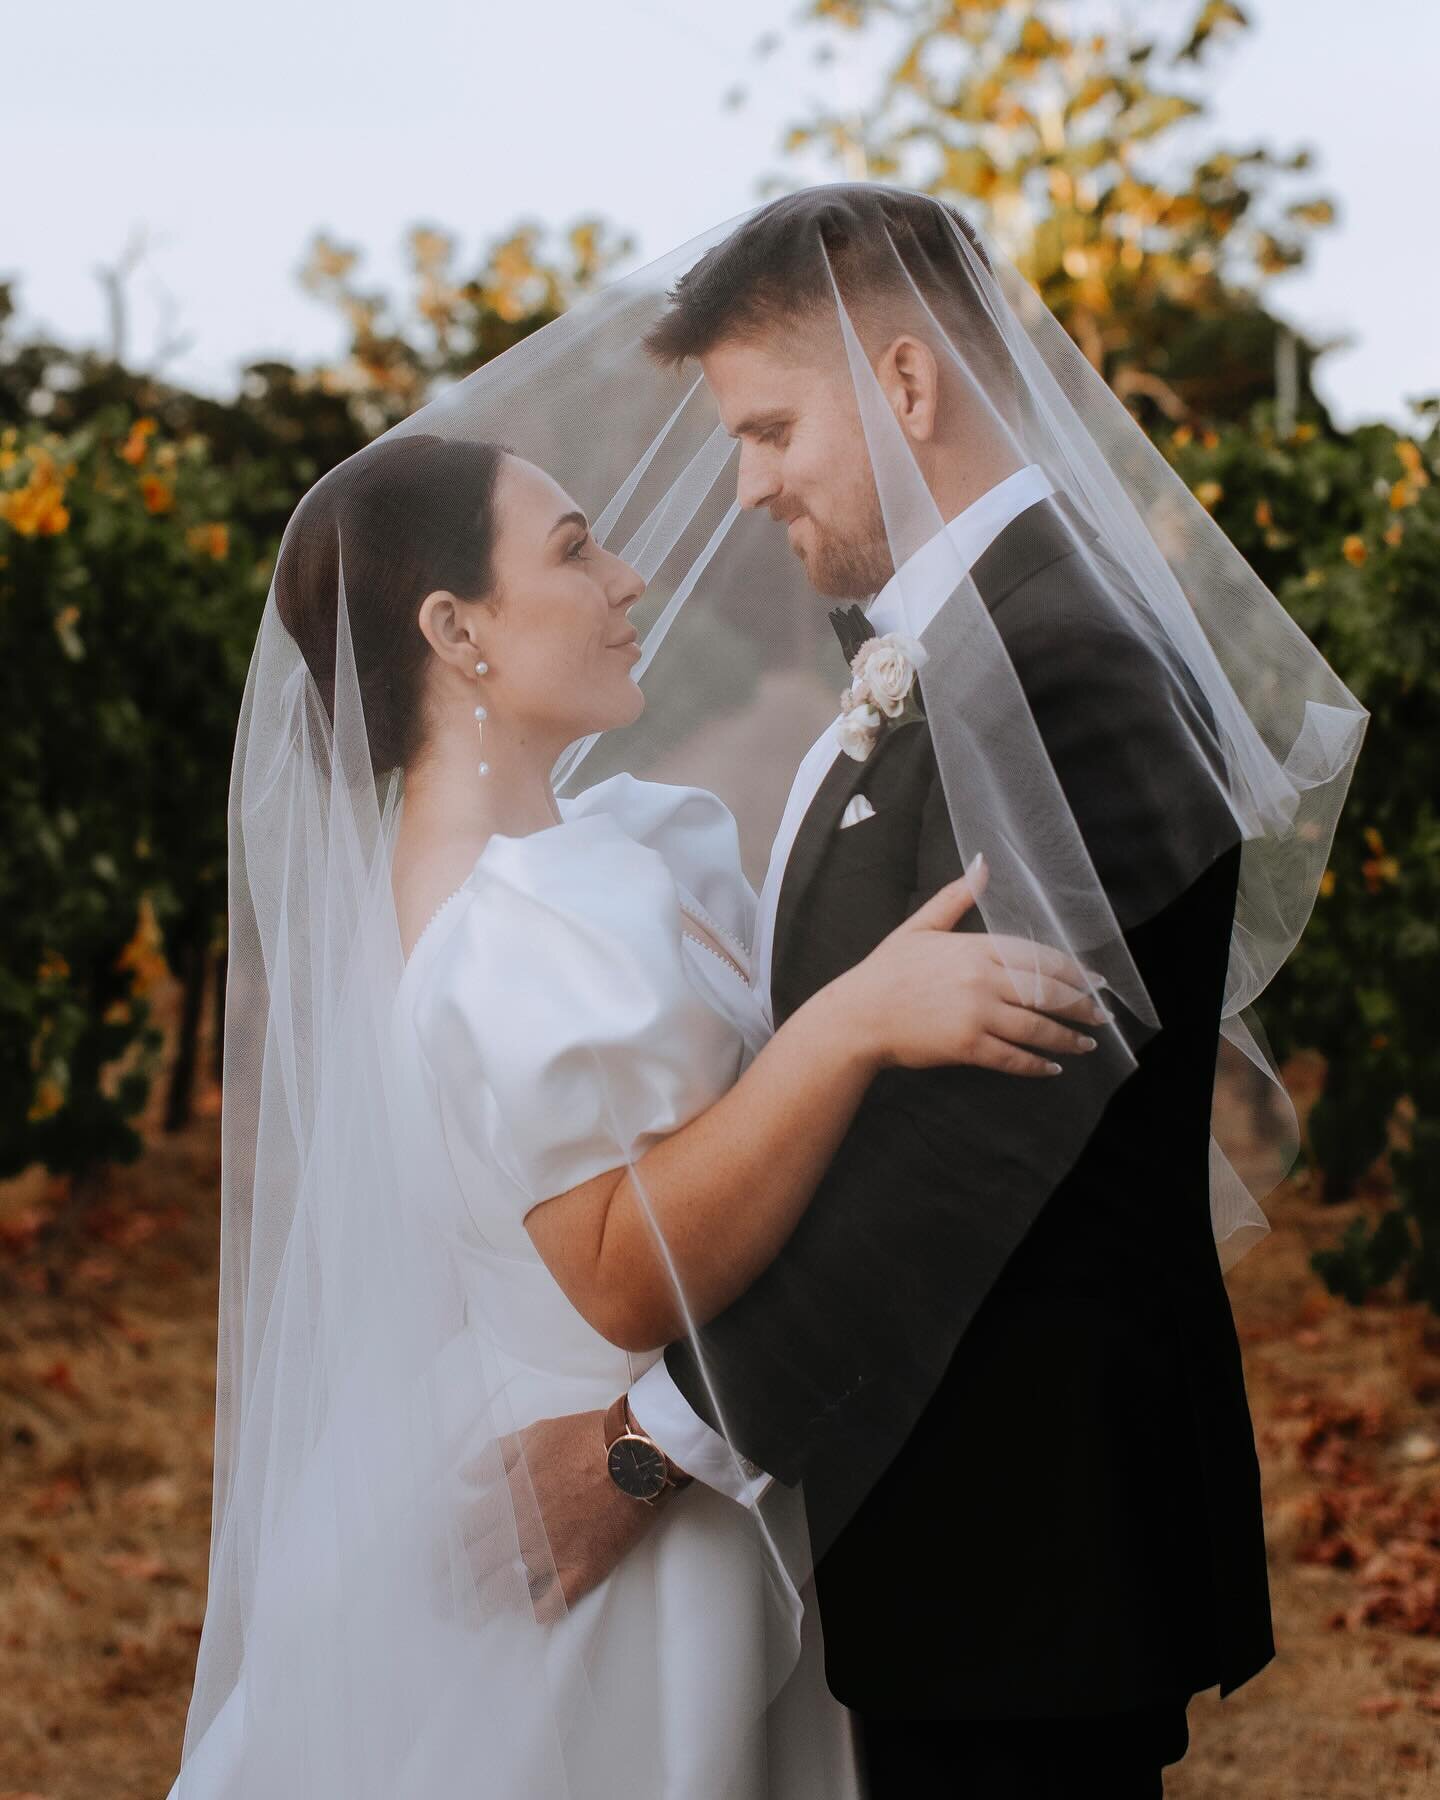 ~ Eliza &amp; Jordan

A truely magical day for these two 💛

Bride @eliza.morgan94 wears the FLORENCE gown from @ingridolicbridal which features bold sleeves, a voluminous skirt and perfected dotted detailing. FLORENCE is available to try and order i